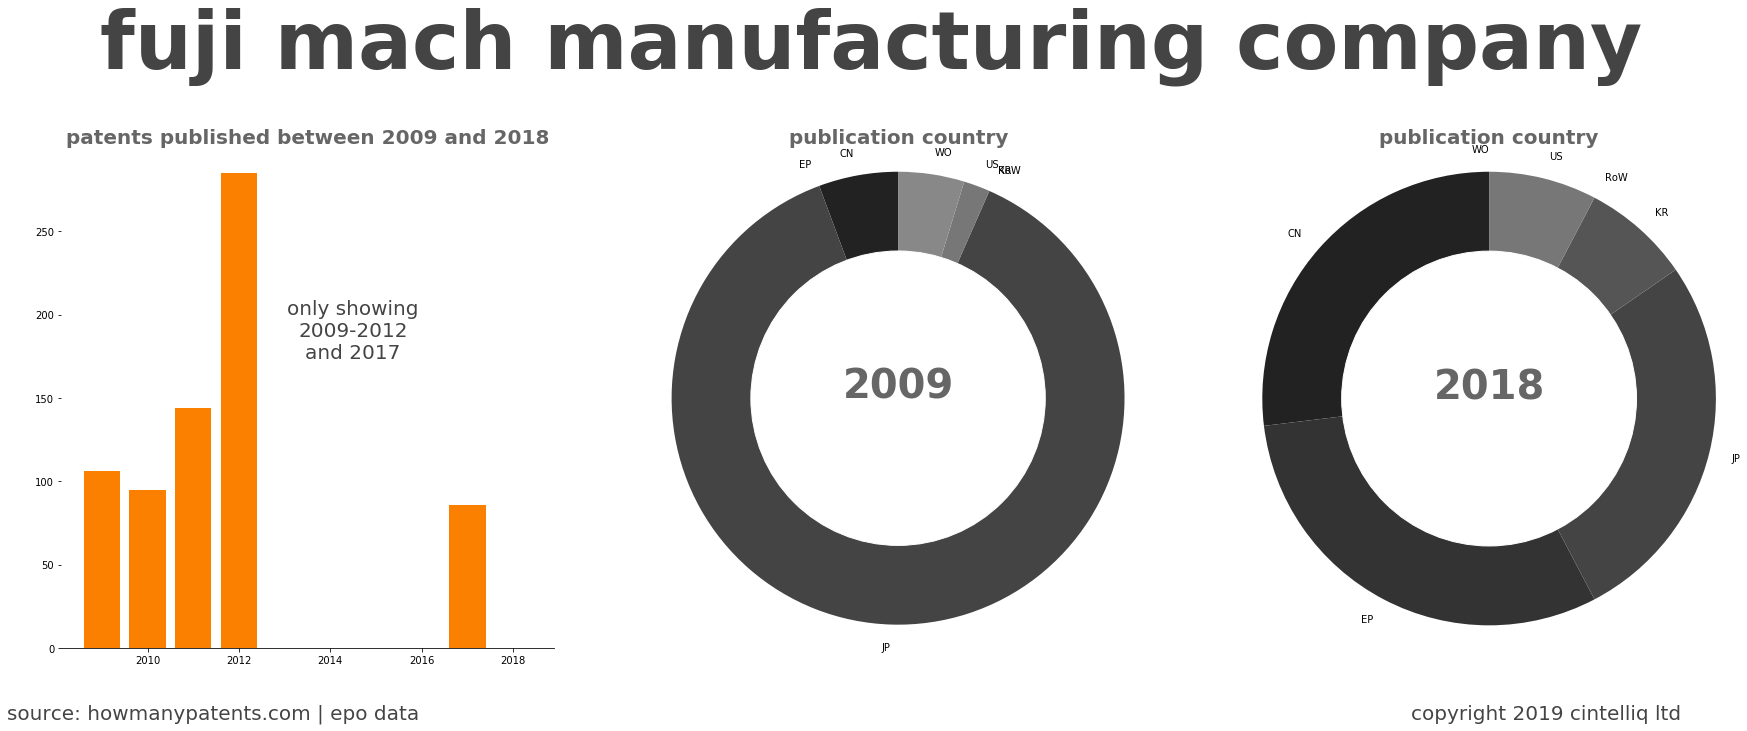 summary of patents for Fuji Mach Manufacturing Company